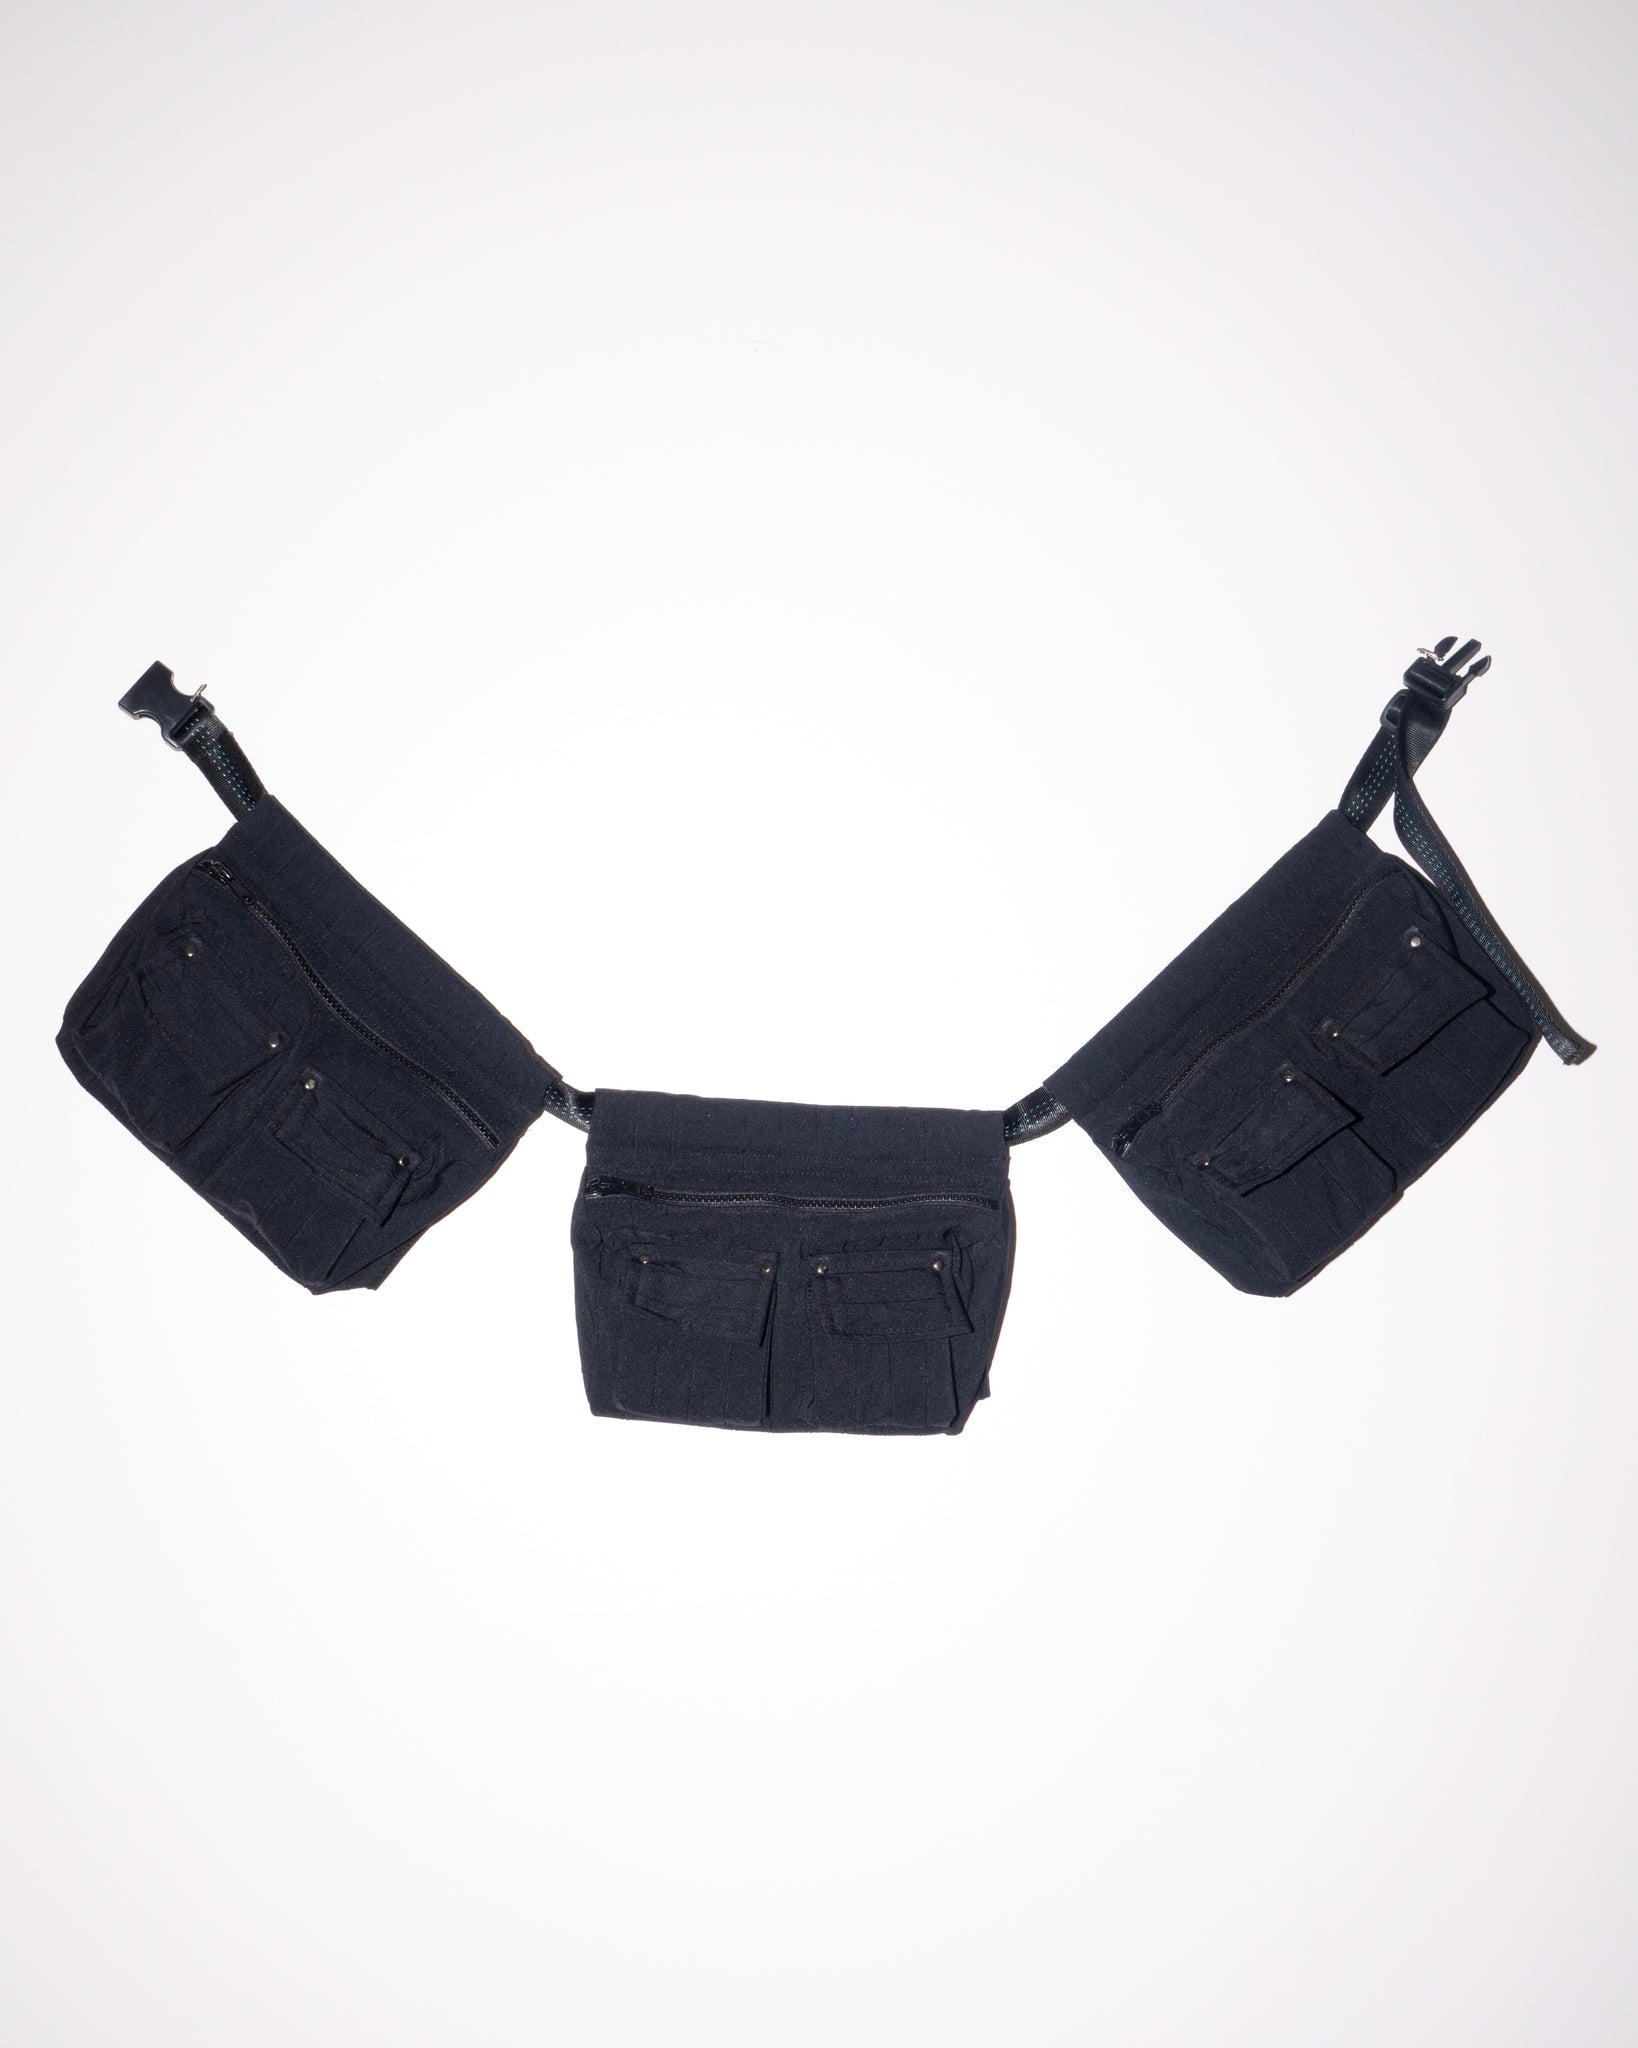 Kkco Quilted Utility Belt in Black